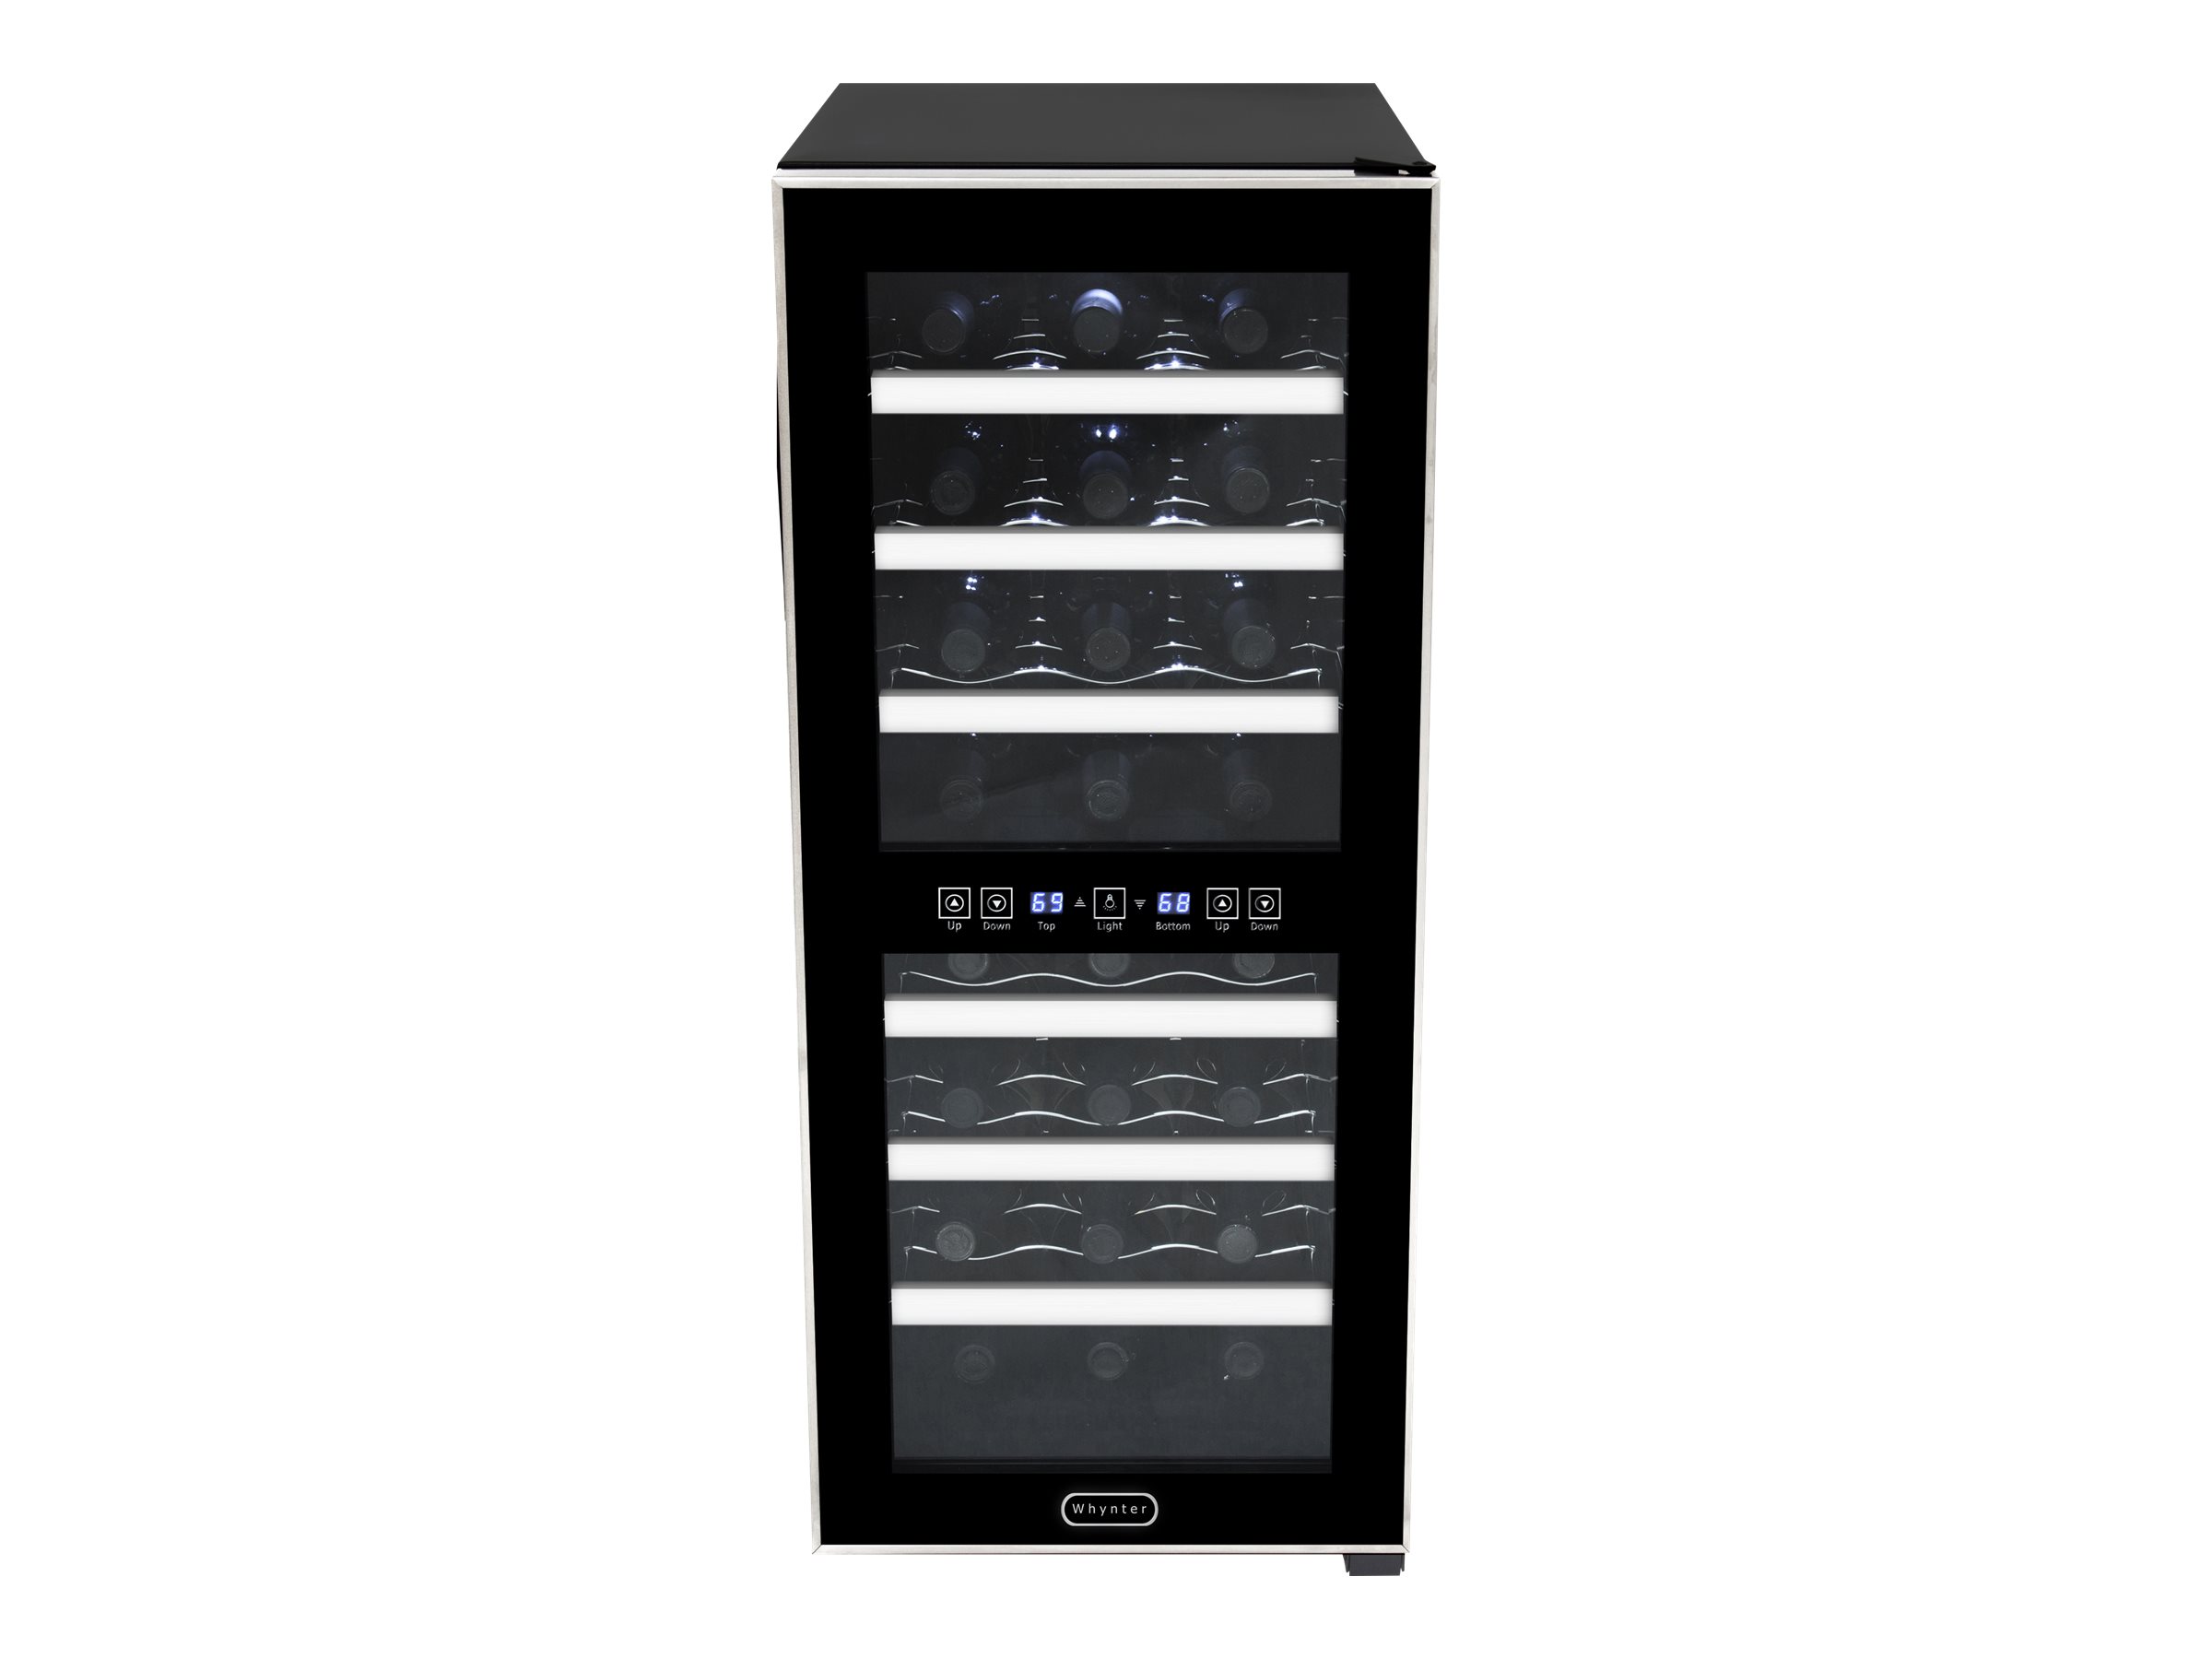 Whynter WC-241DS - Wine cooler - width: 14 in - depth: 20.2 in - height: 33.5 in - image 2 of 6